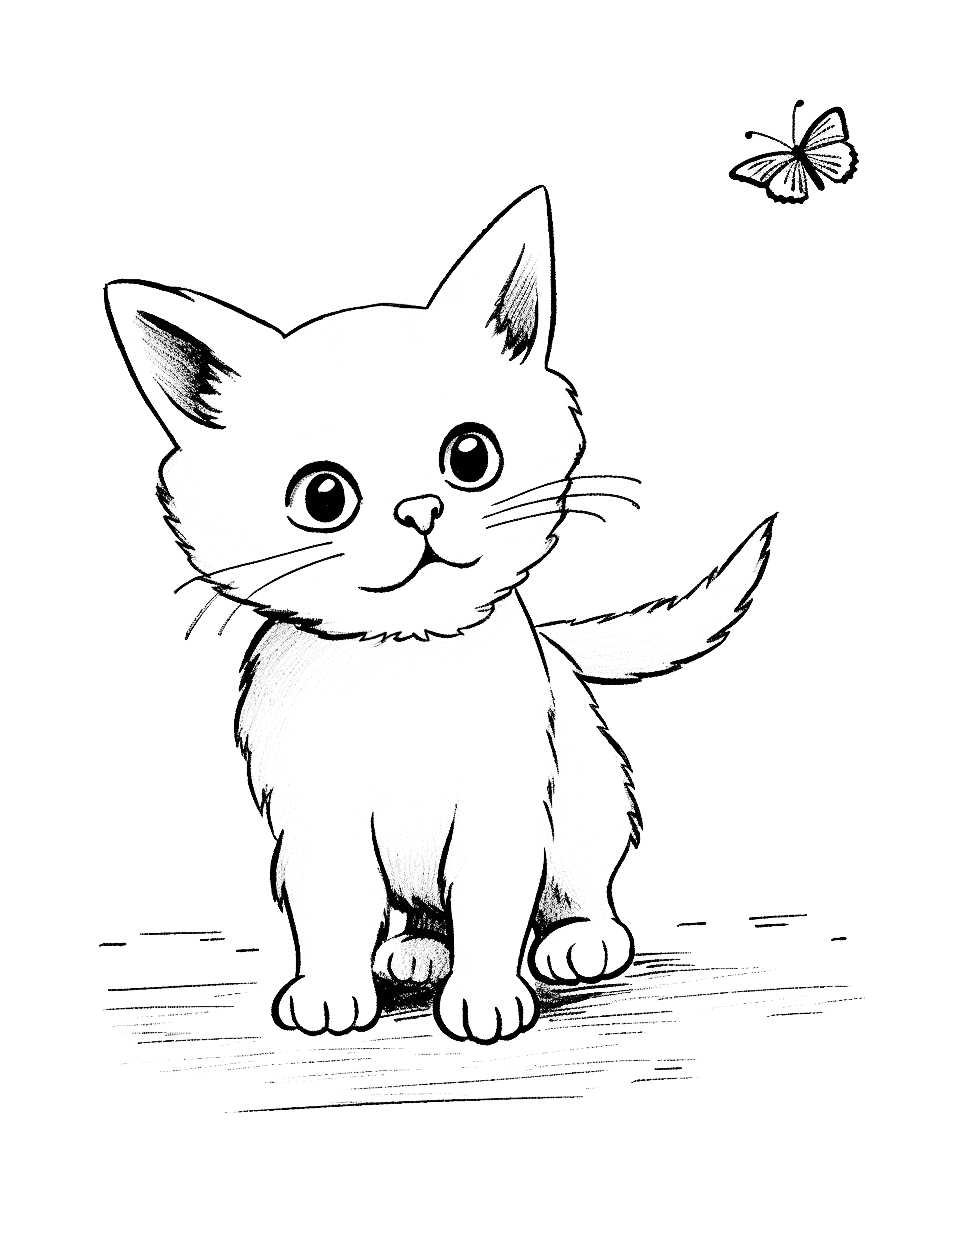 Baby Cat Chasing a Butterfly Coloring Page - A baby cat bounding joyously after a fluttering butterfly.